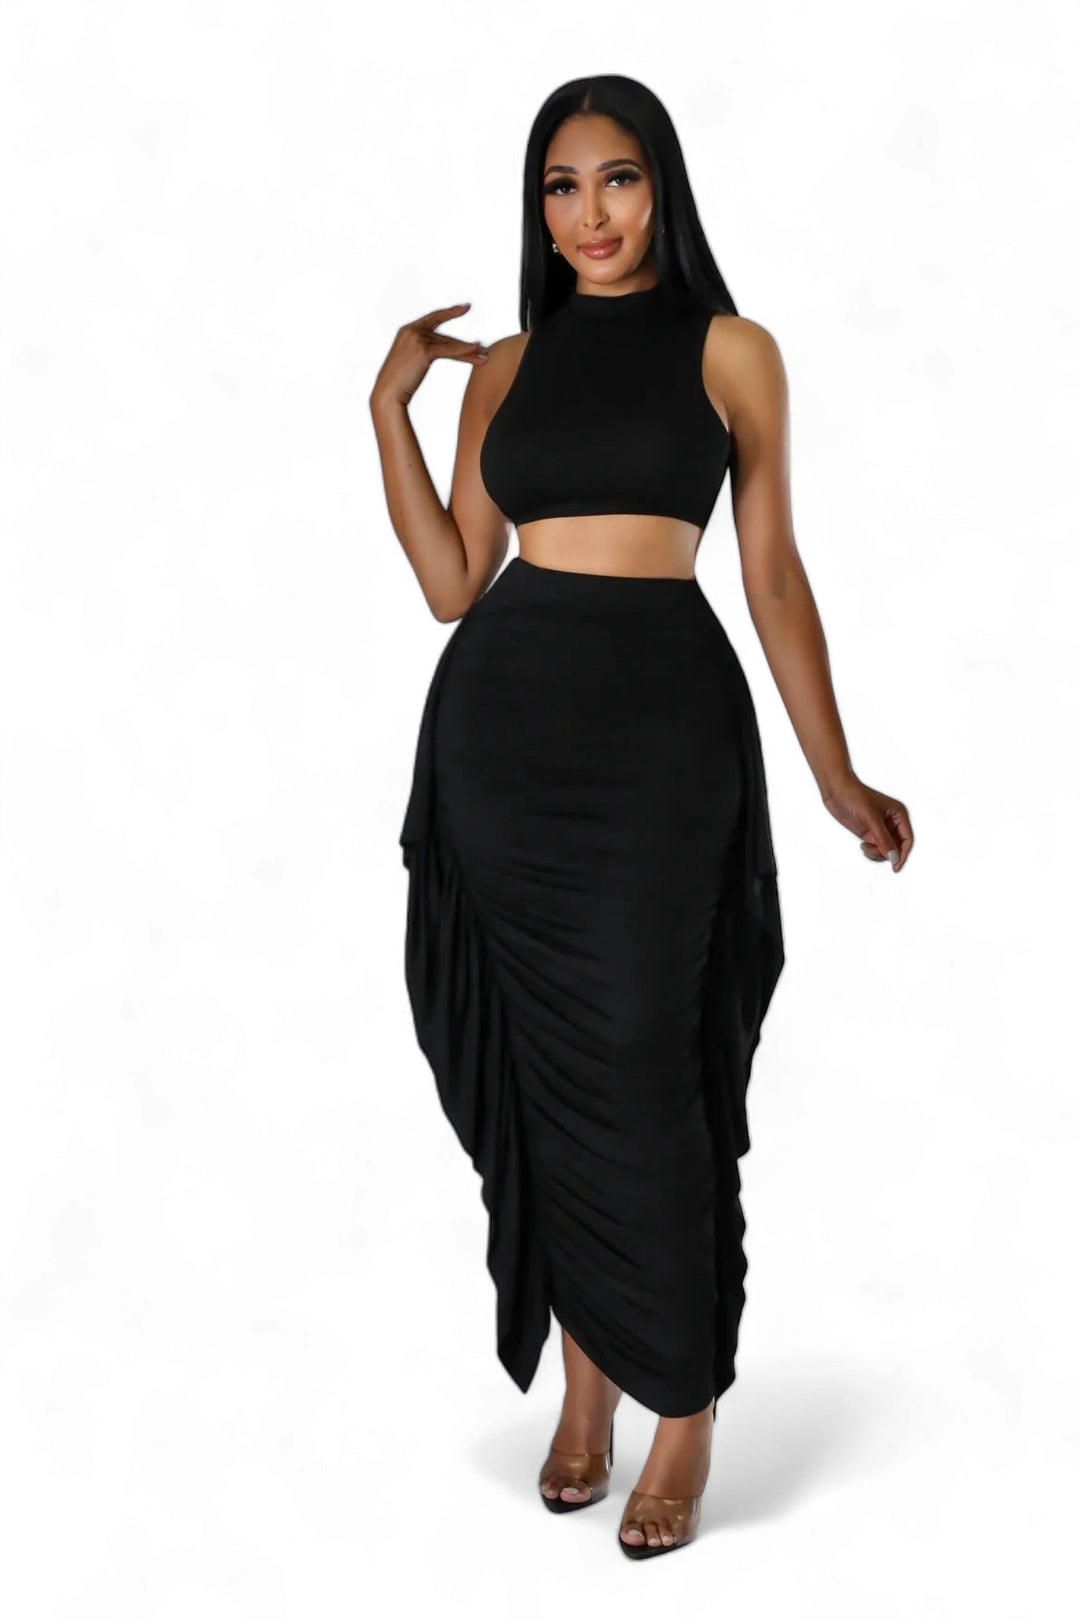 a woman wearing a black skirt and crop top